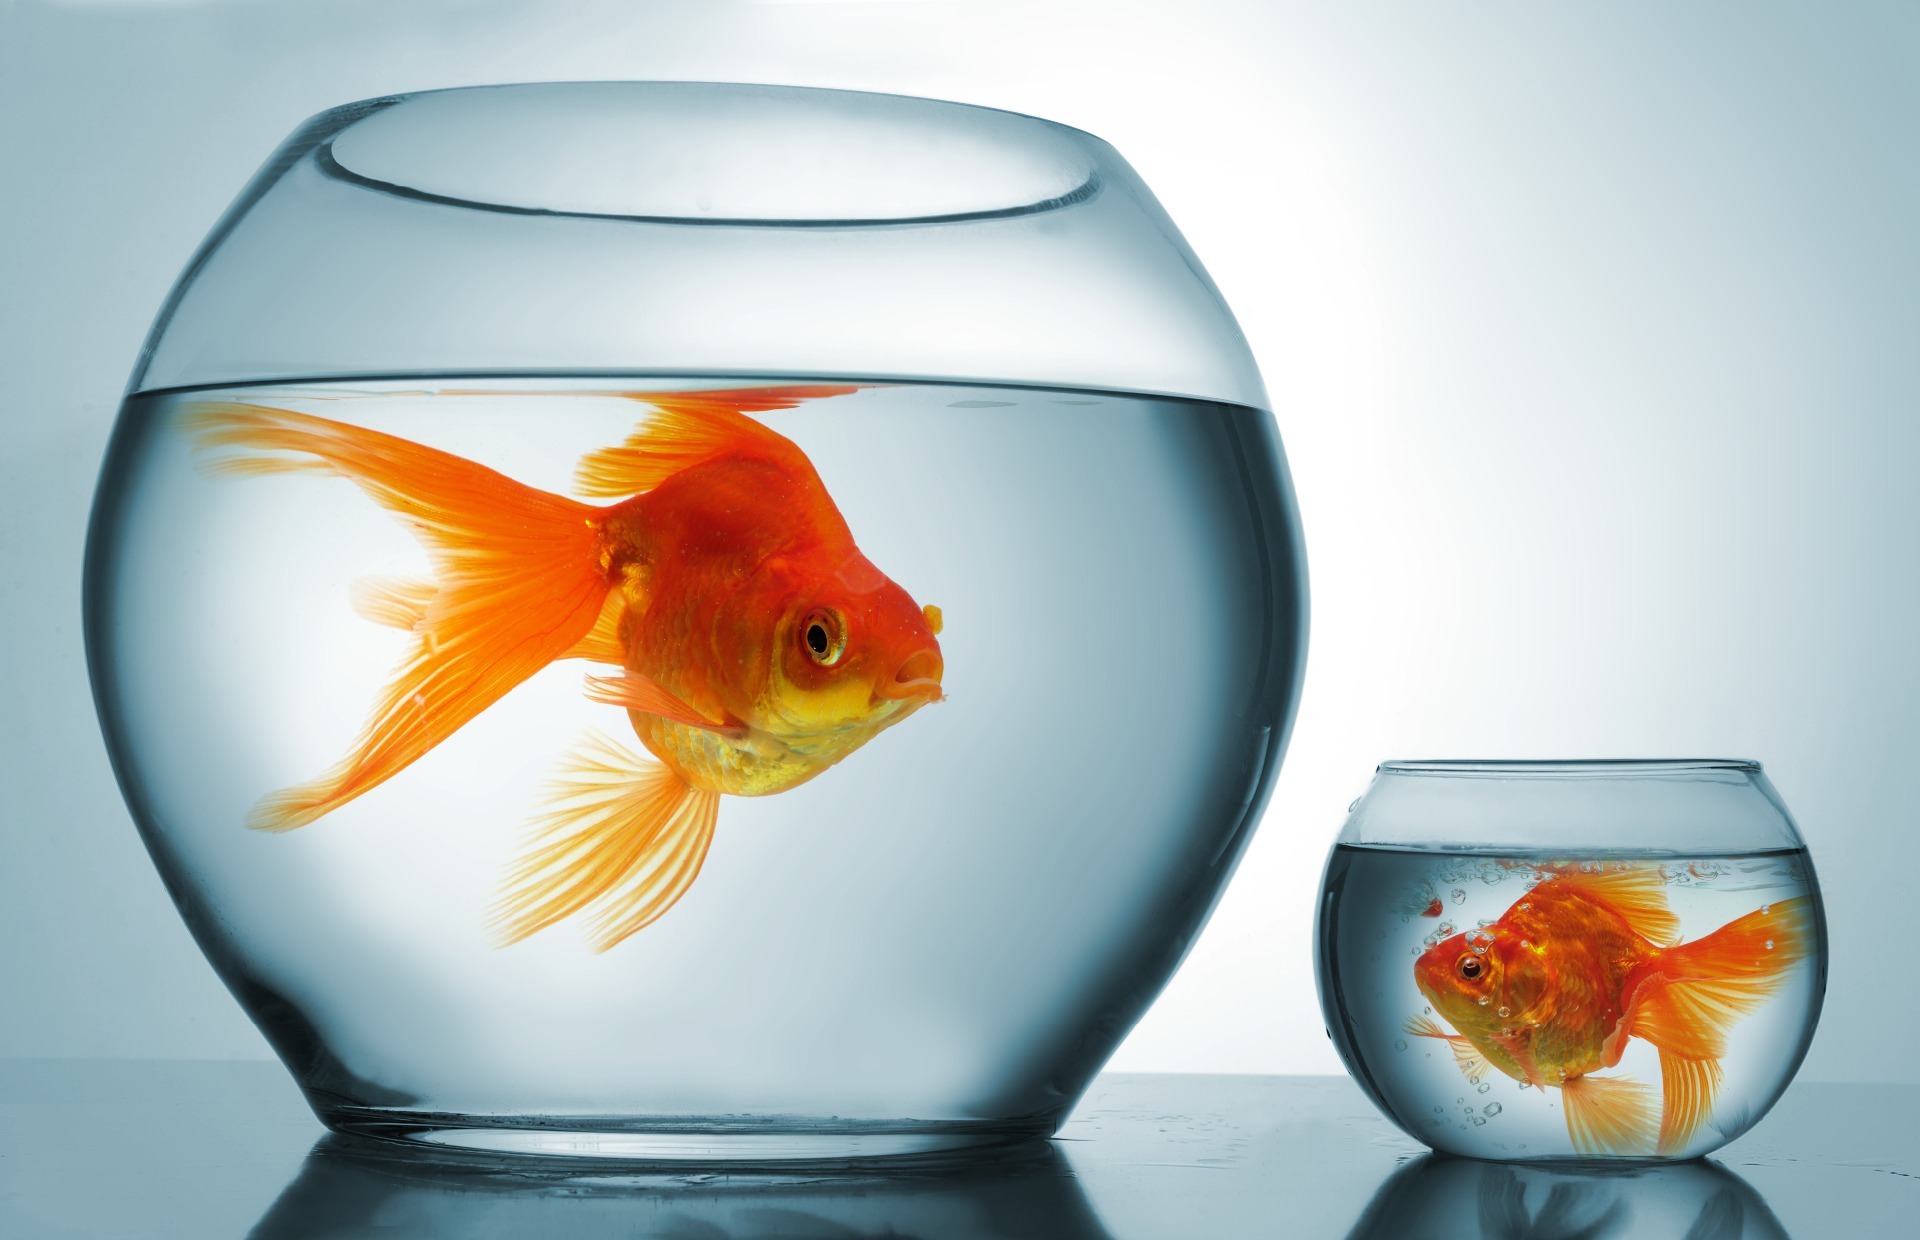 A gold fish in a big bowl, next to a similar sized-gold fish in a small bowl